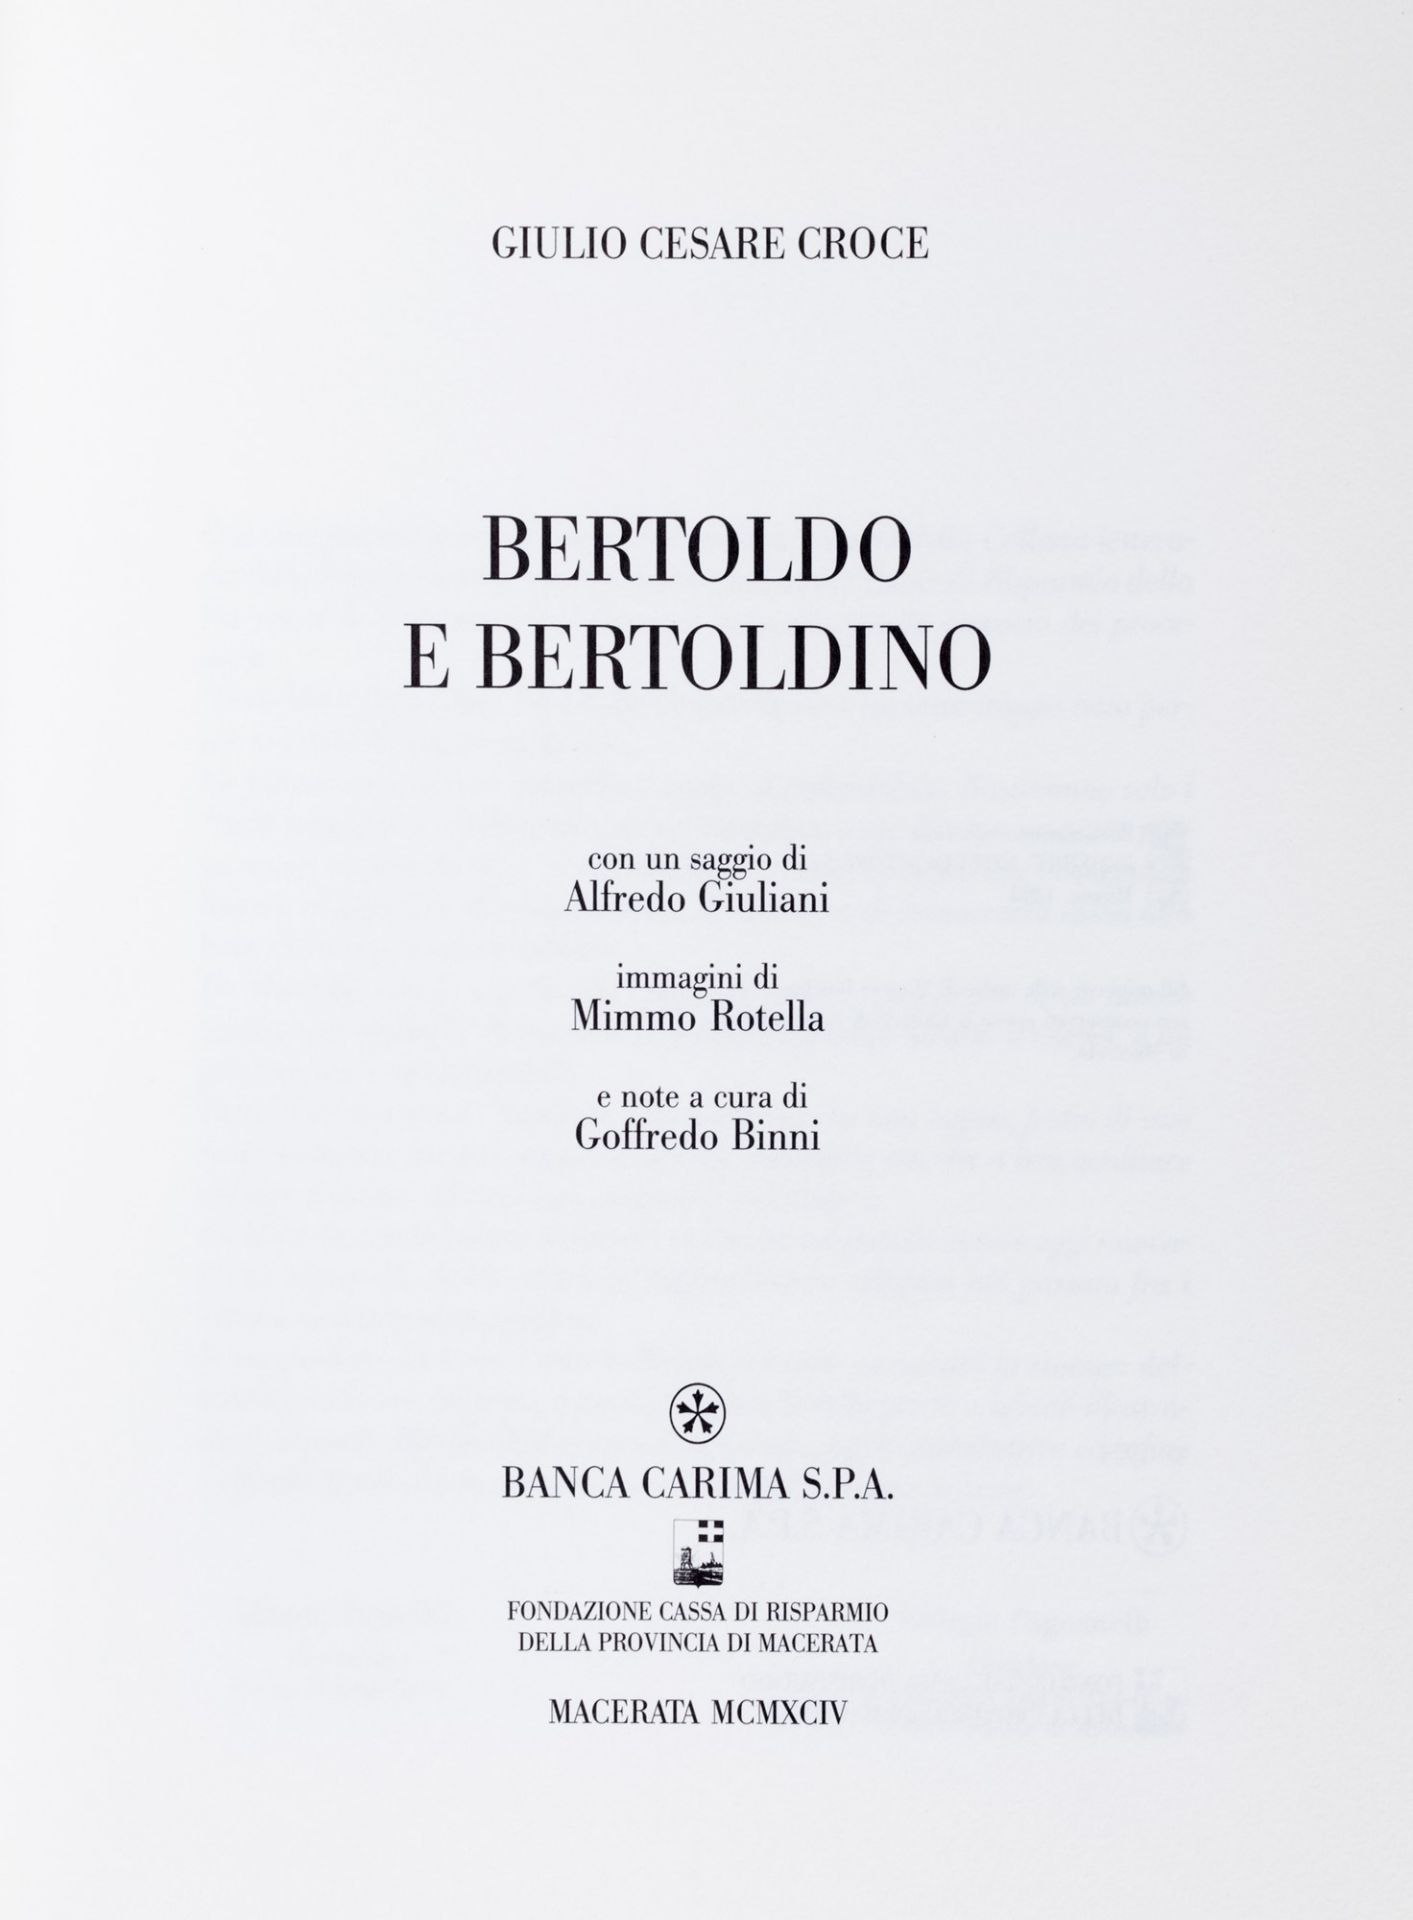 Croce, Giulio Cesare - Bertoldo and Bertoldino. with an essay by Alfredo Giuliani, images by Mimmo R - Image 3 of 3